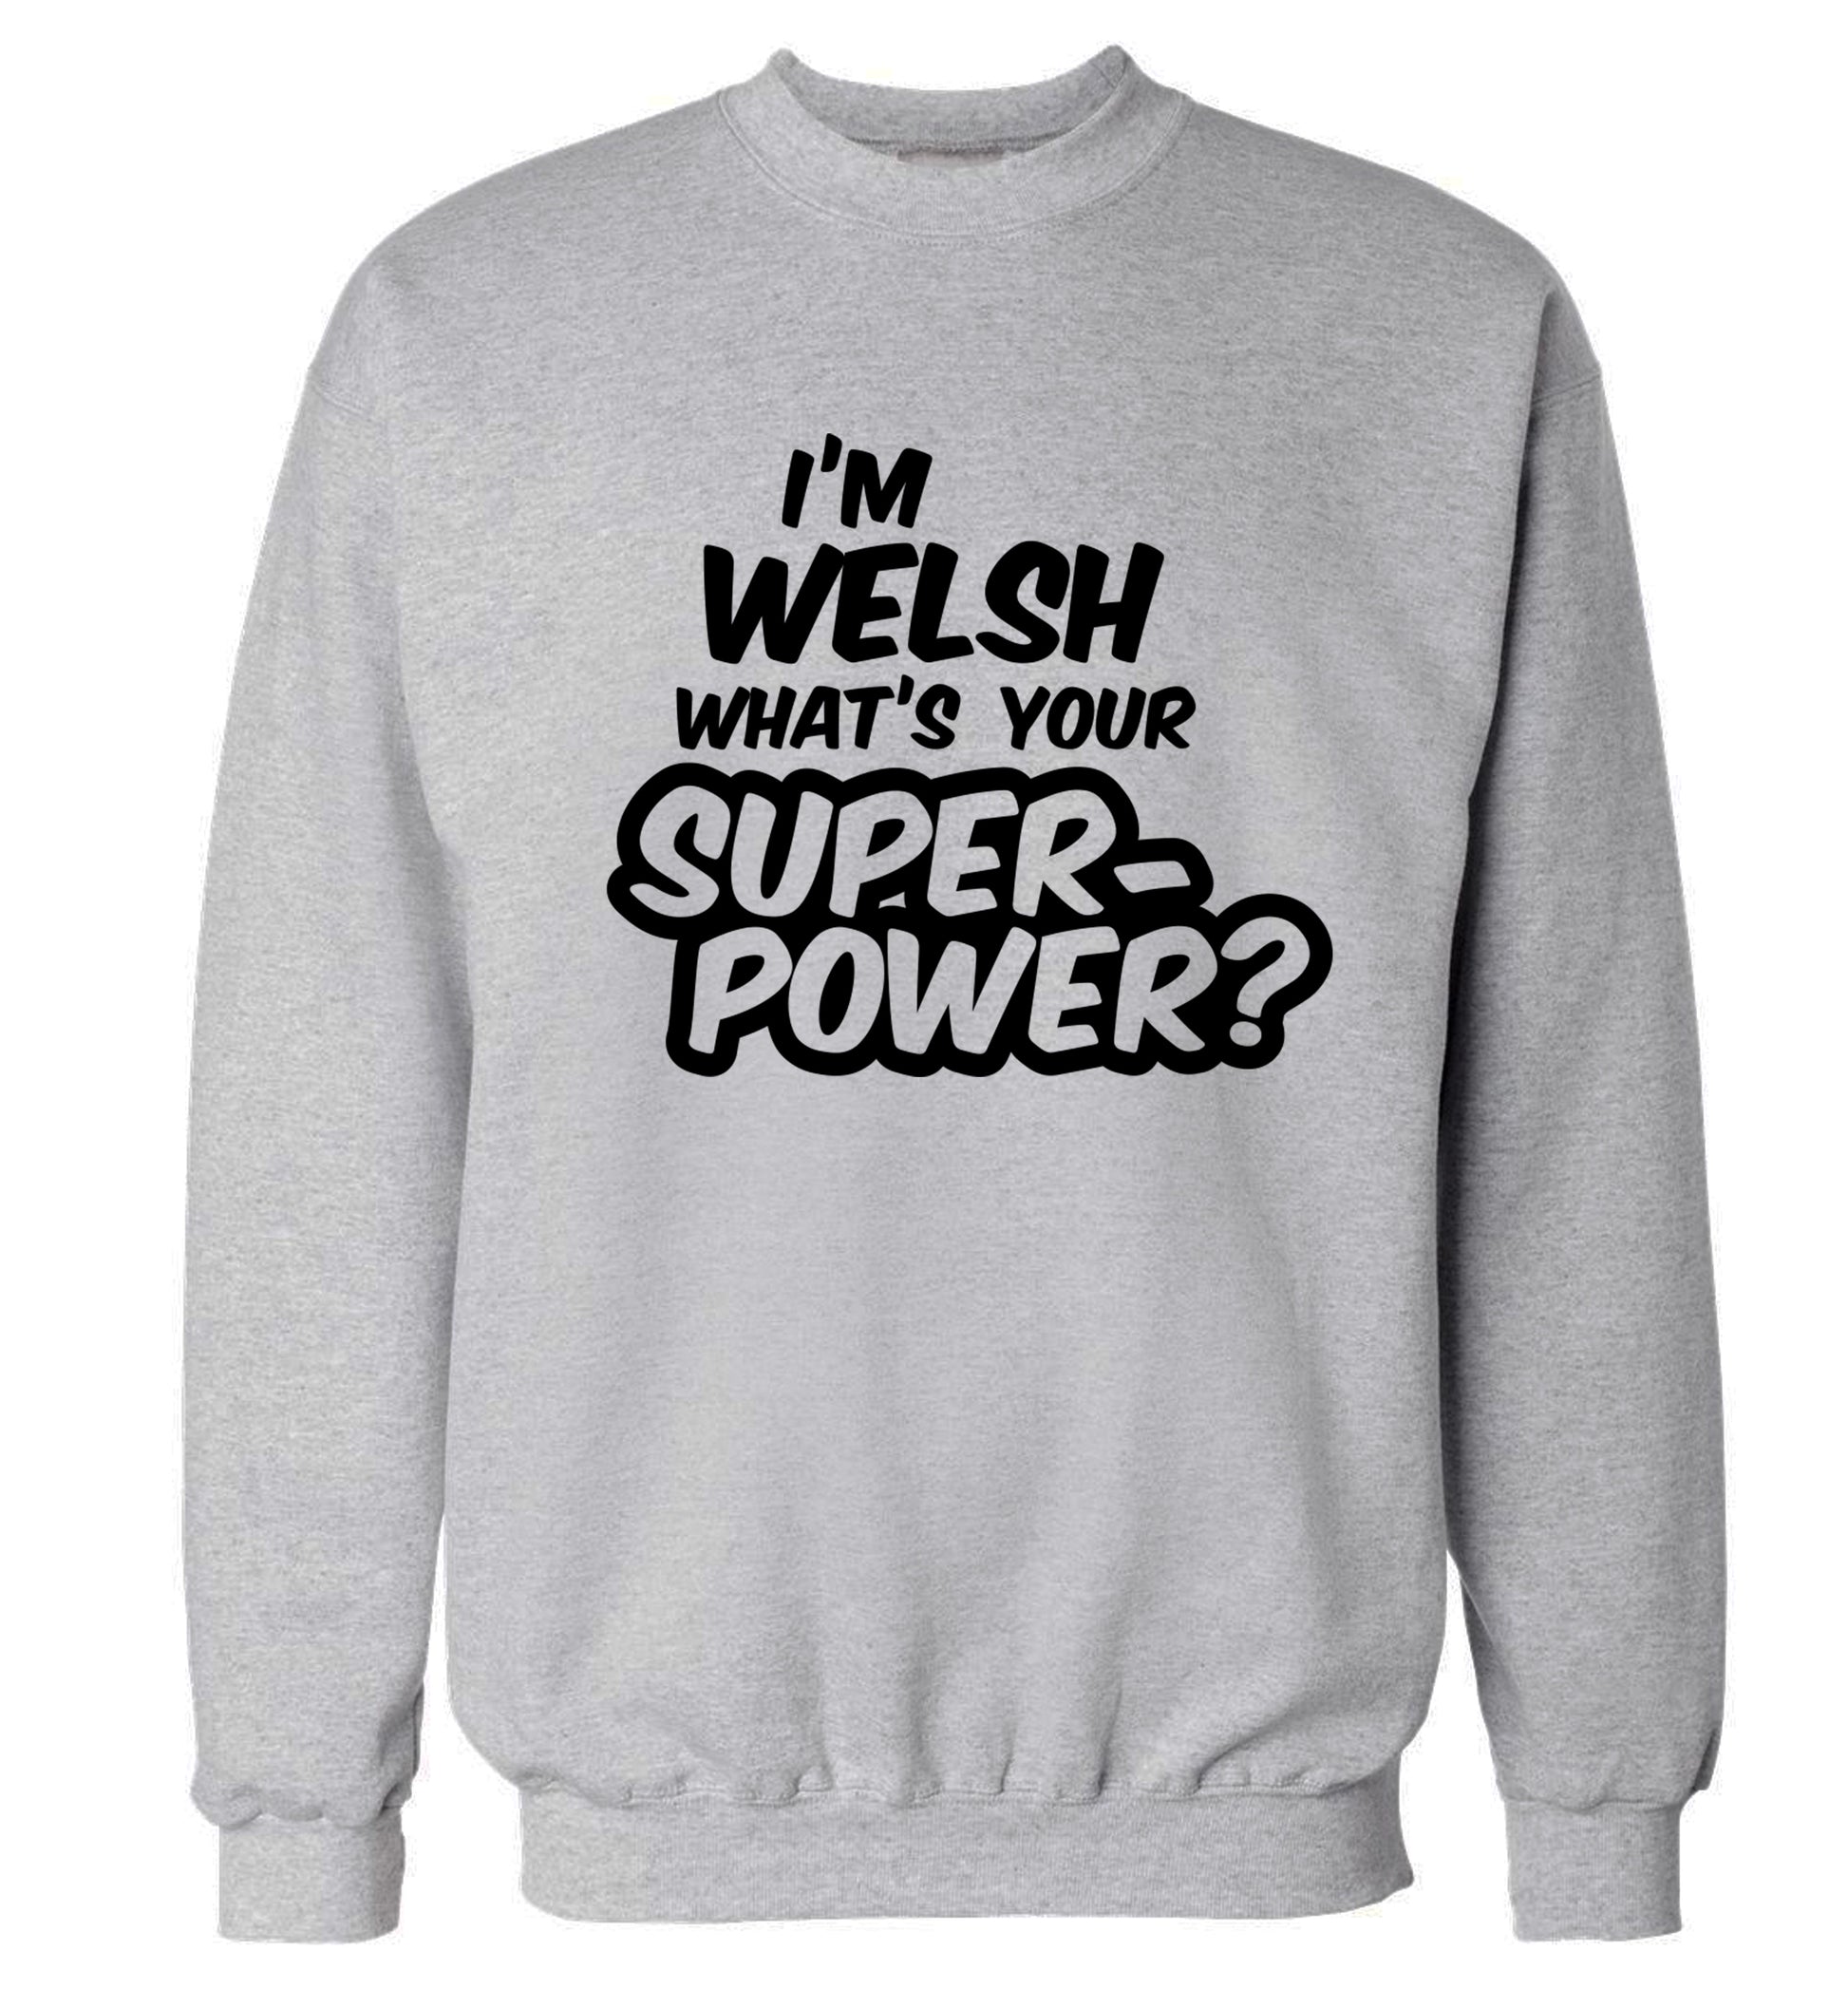 I'm Welsh what's your superpower? Adult's unisex grey Sweater 2XL